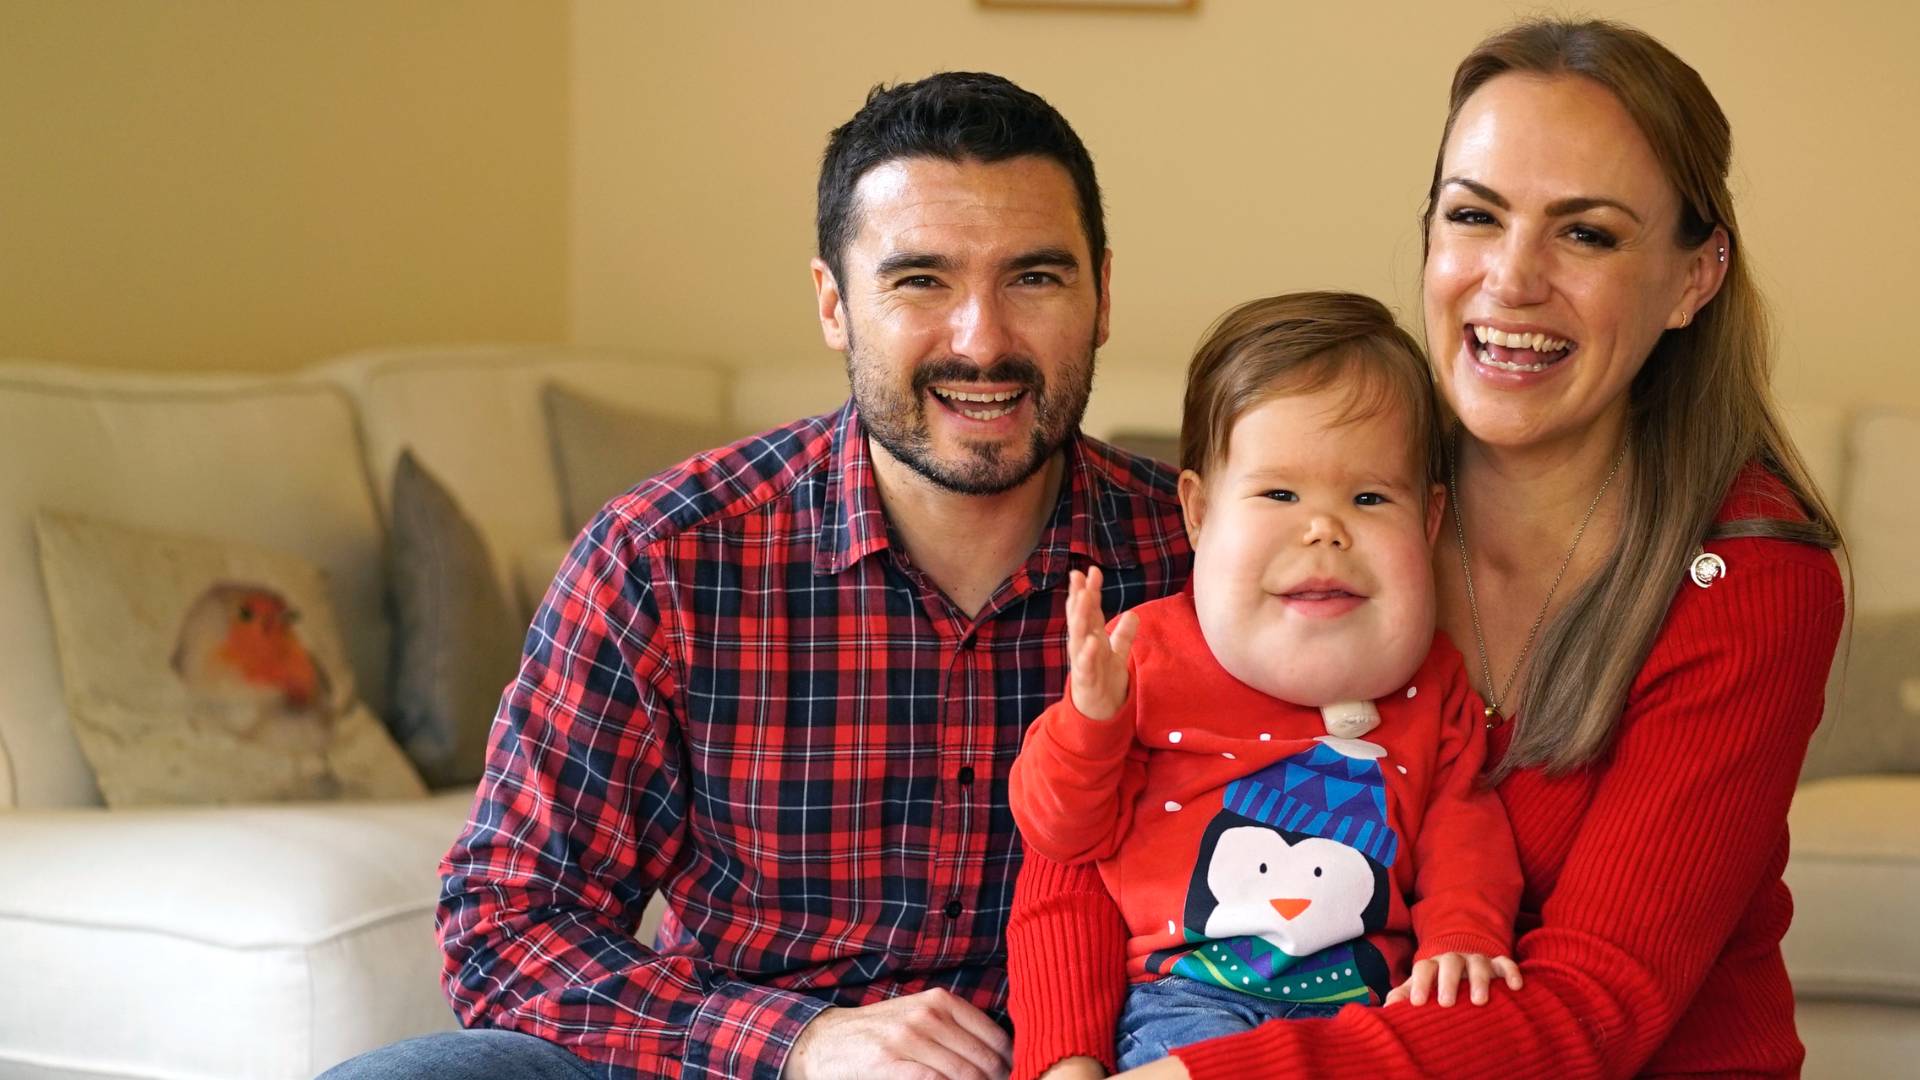 Finley, a two year old boy with lymphangioma, which causes swelling in the lower half of his face, with his mother and family.